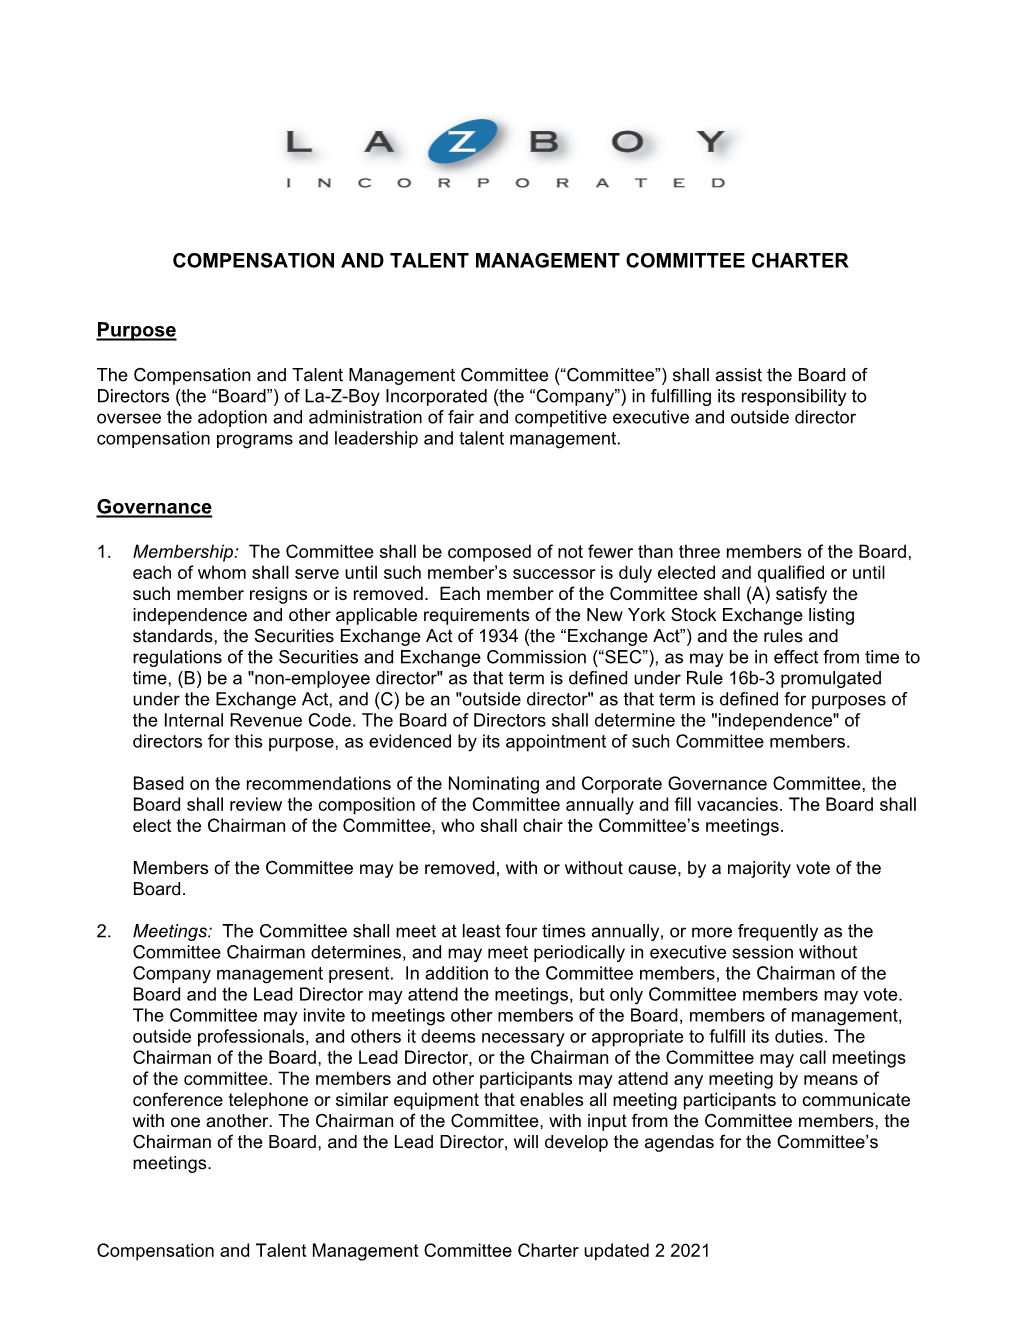 Compensation and Talent Management Committee Charter